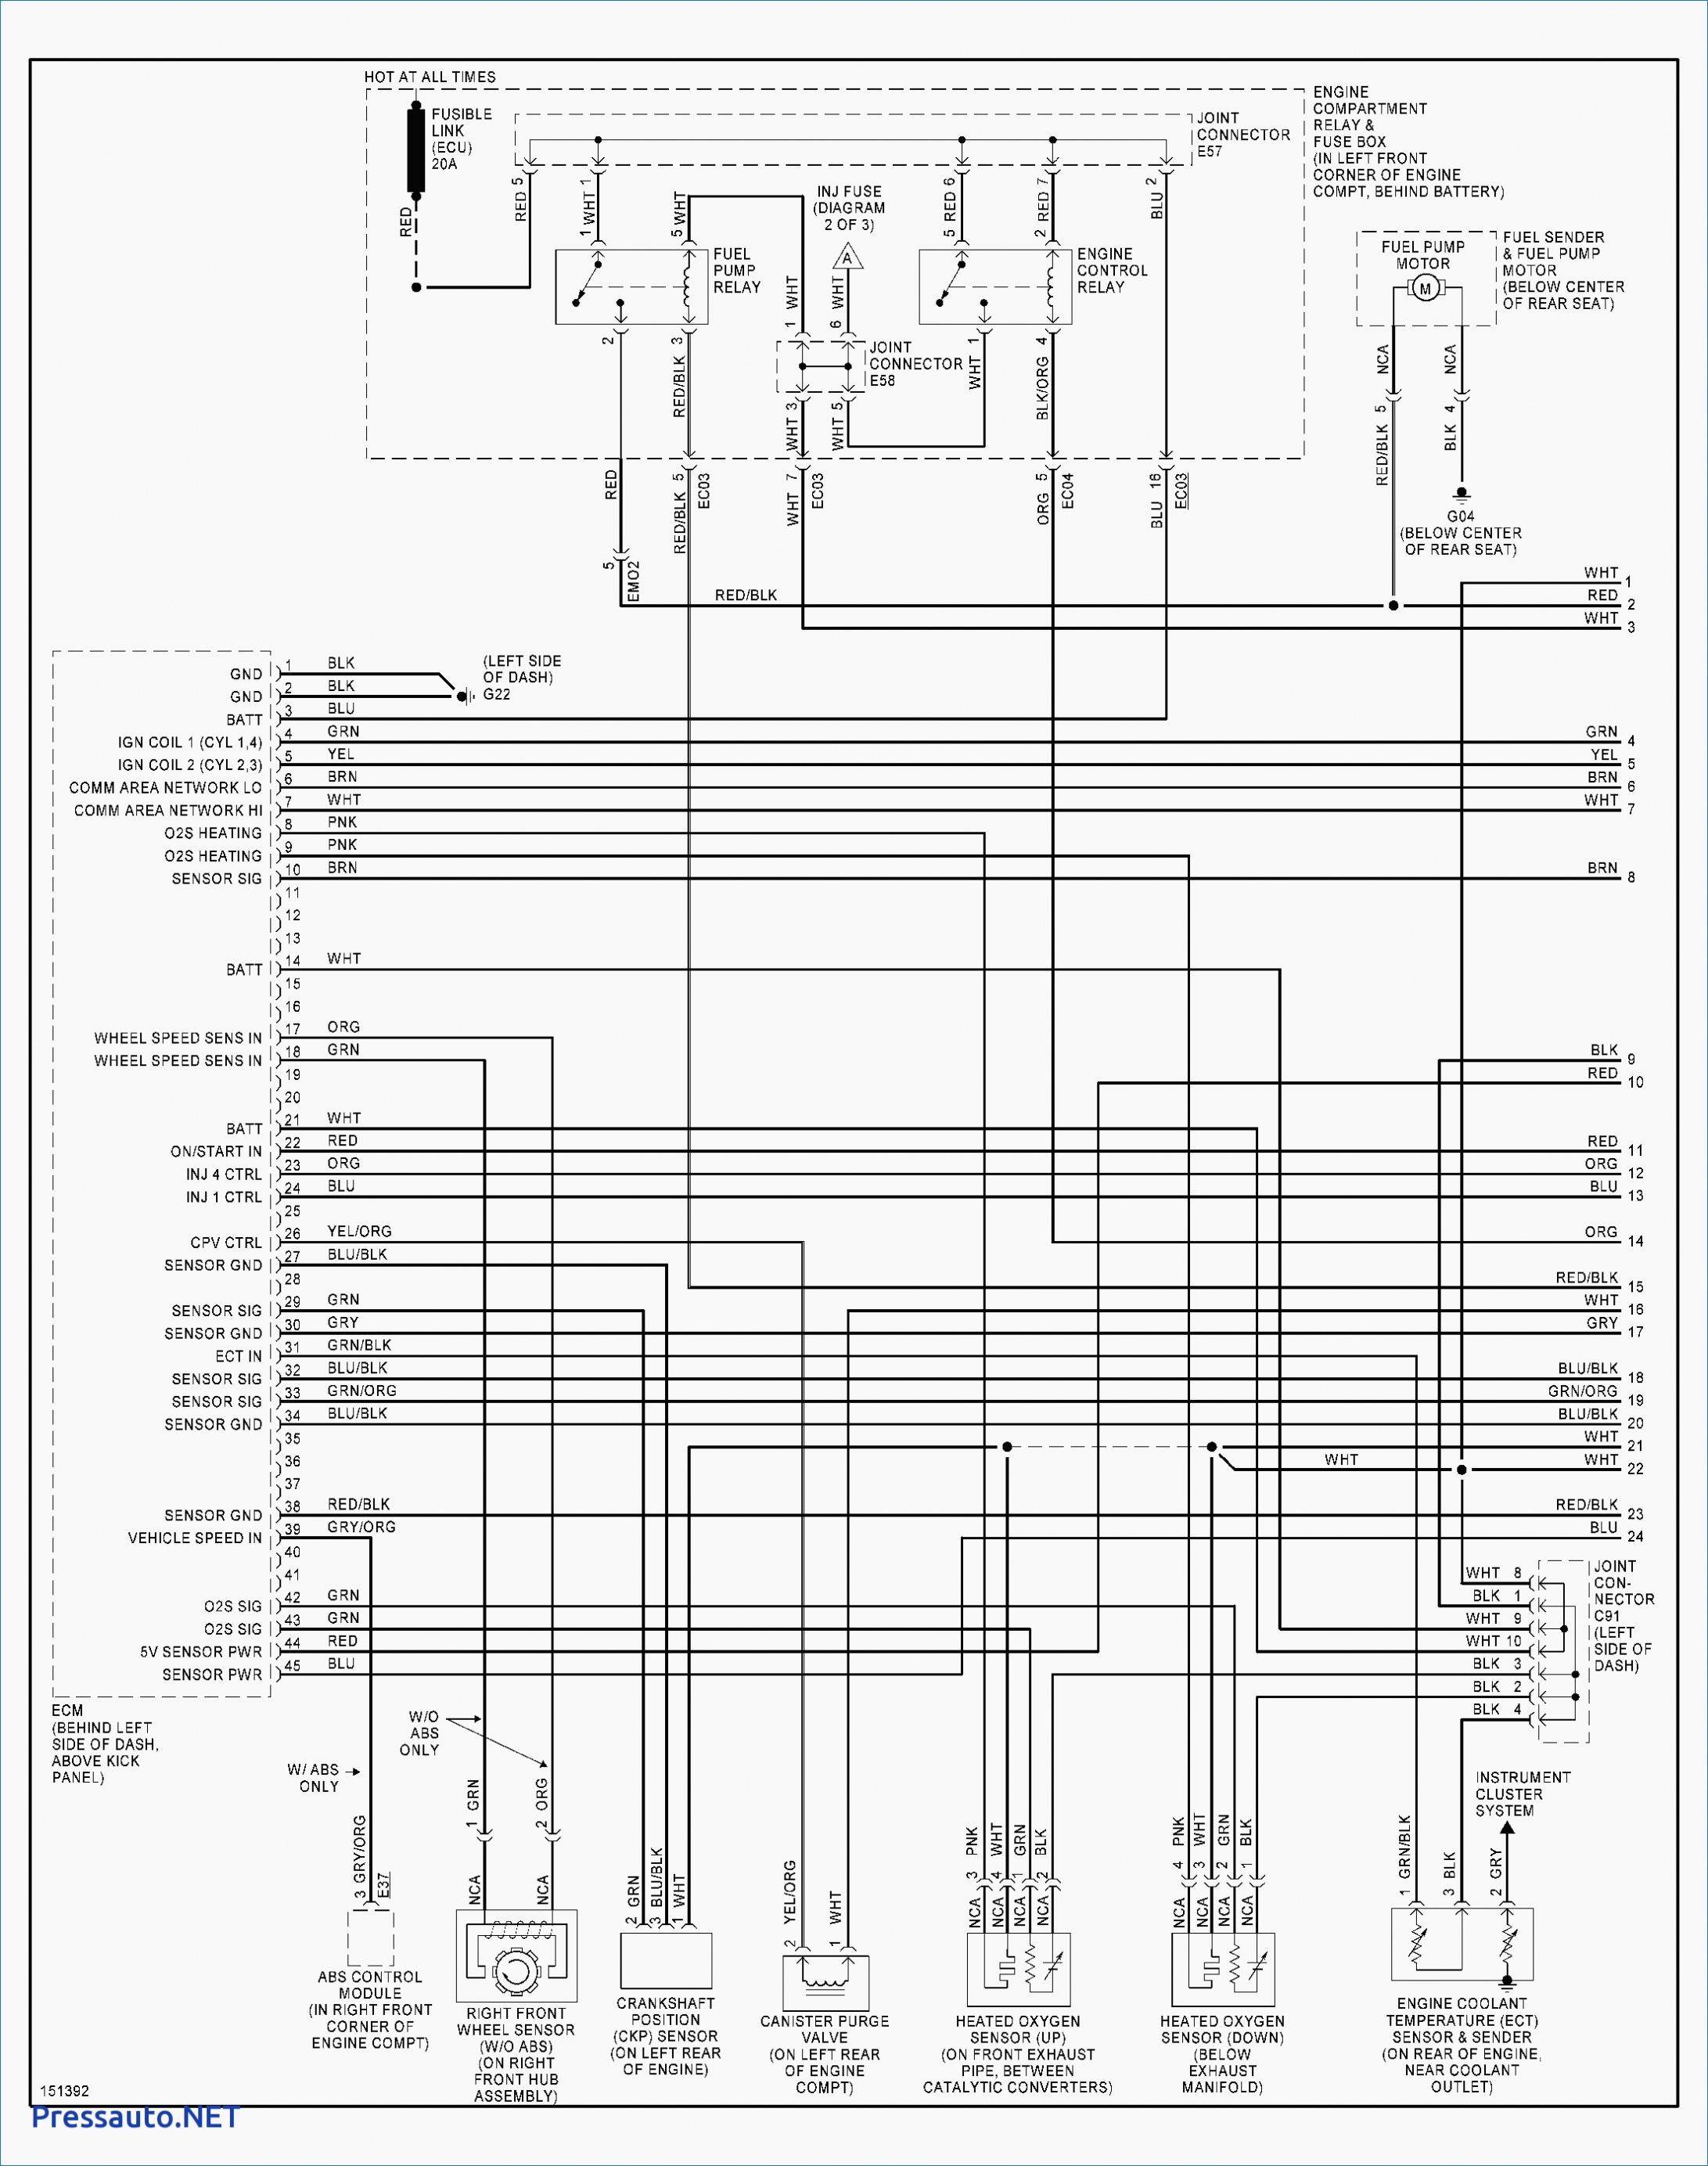 Briggs And Stratton V Twin Wiring Diagram | Air American Samoa - Briggs And Stratton V Twin Wiring Diagram